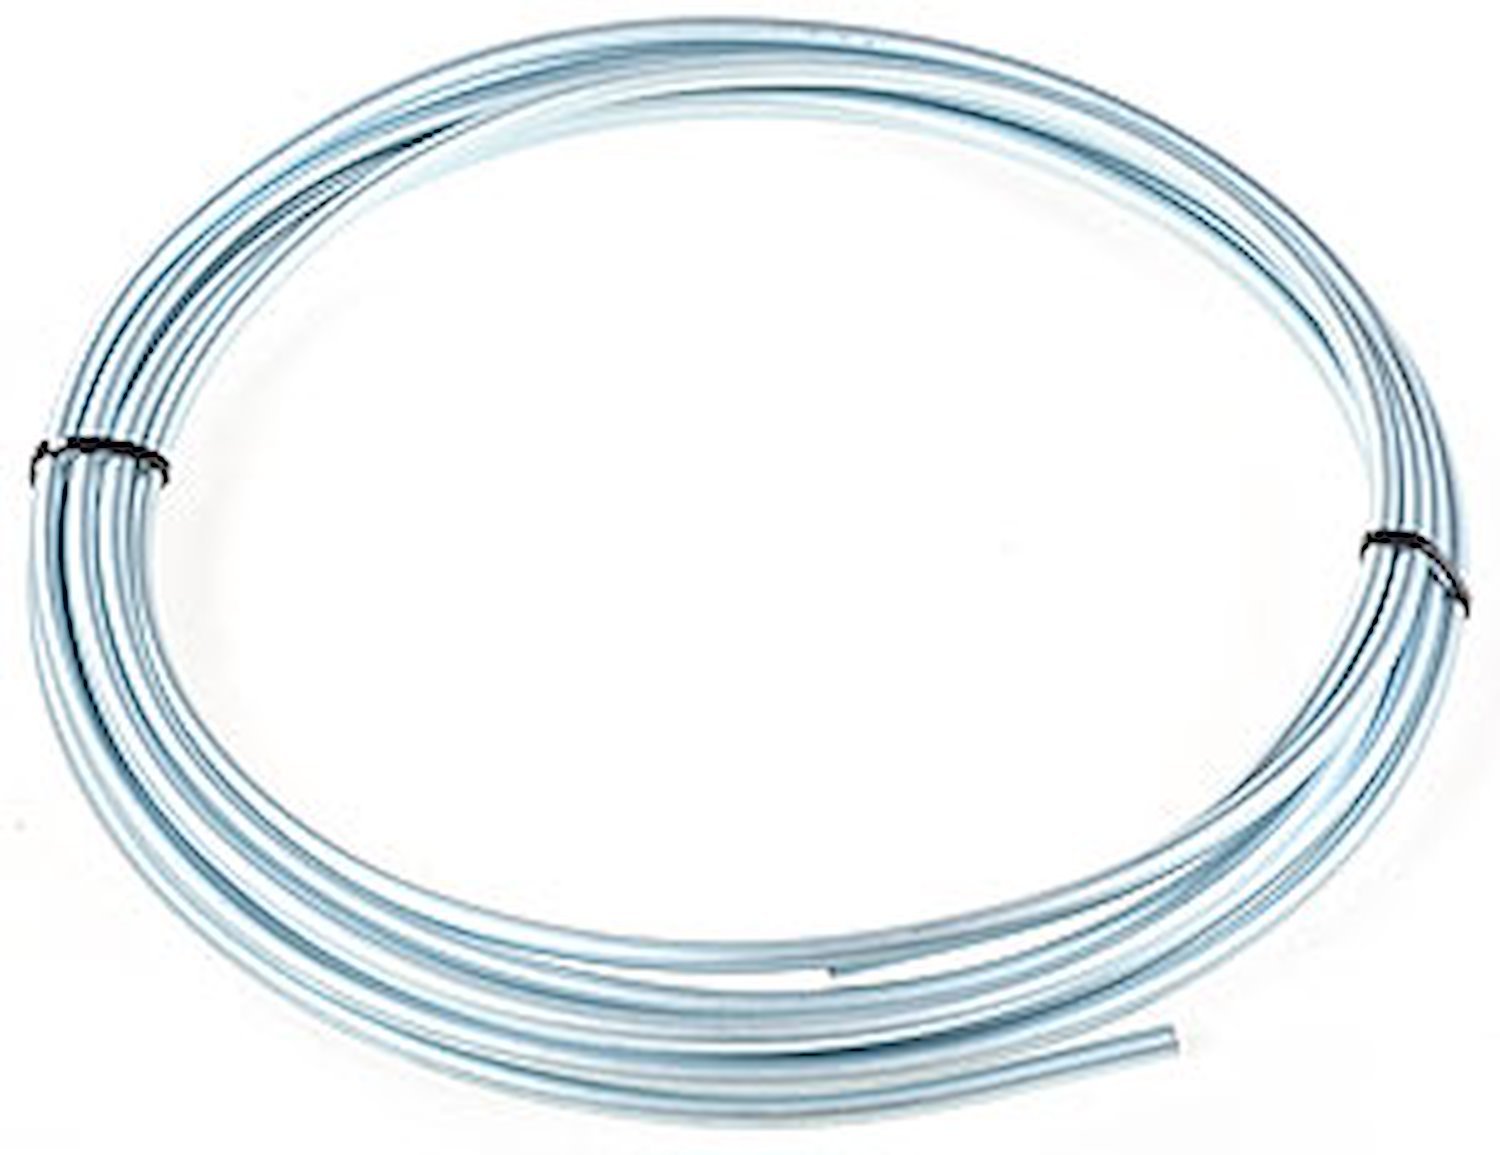 Zinc Fuel and Transmission Cooler Tubing 5/16 in. Diameter x 25 ft.